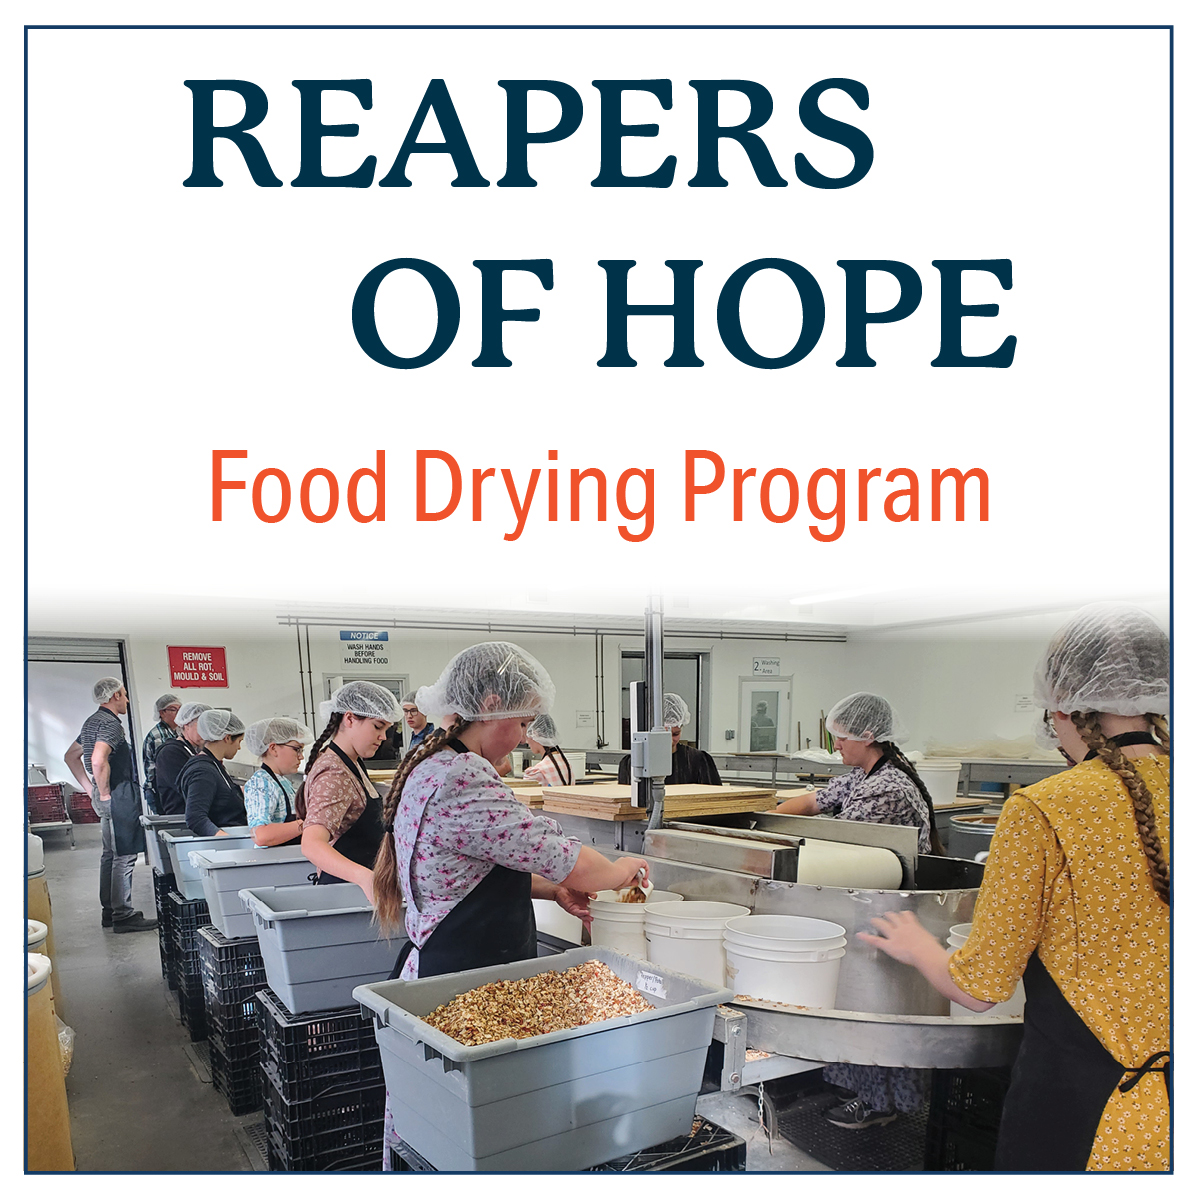 Reapers of Hope Food Drying